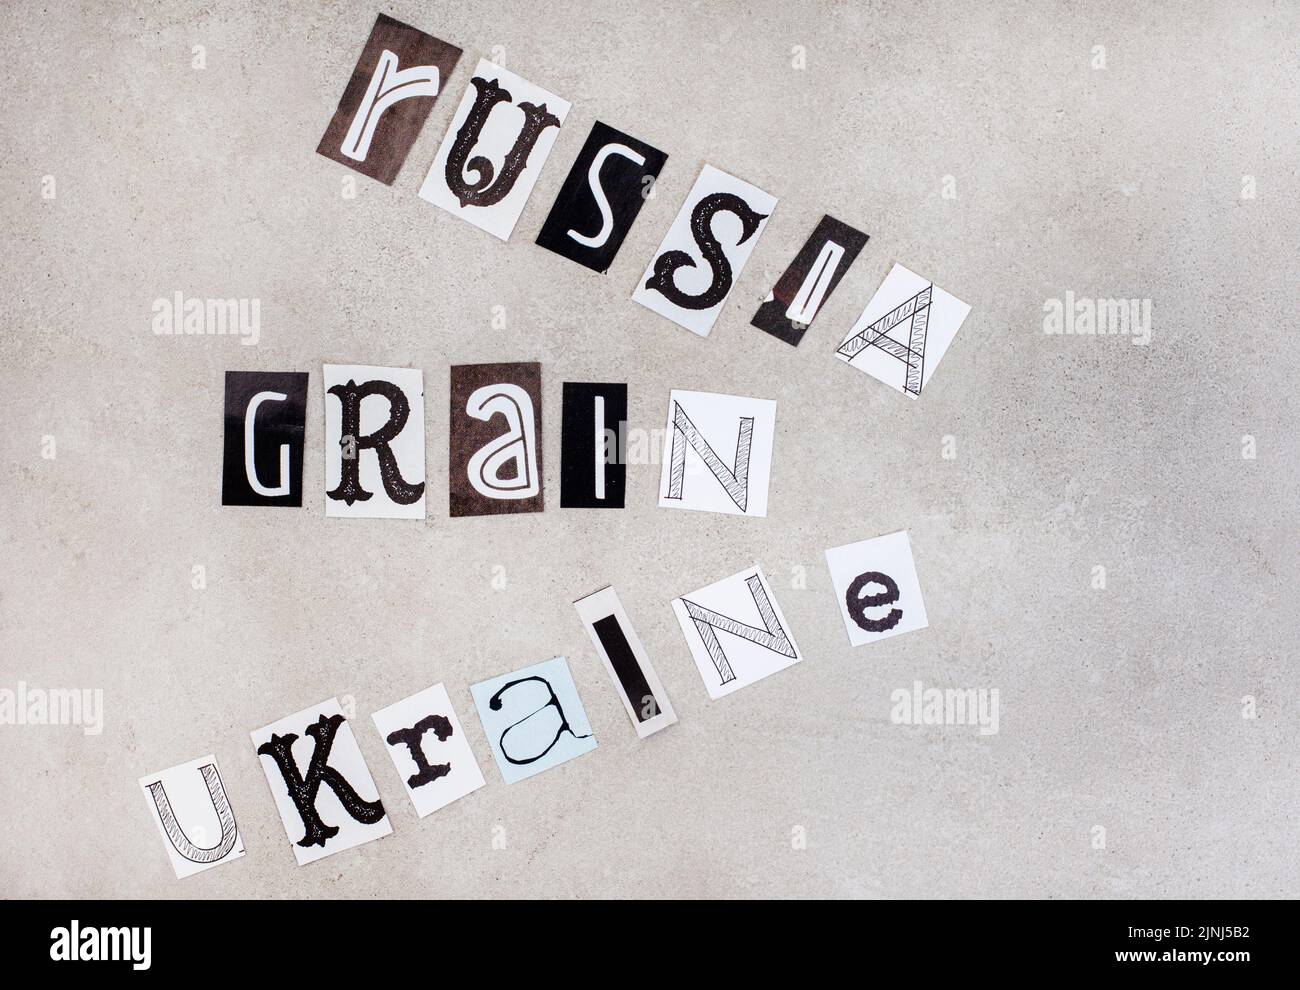 Russia, Ukraine and war, social issues surrounding it in magazine clippings on grey Stock Photo